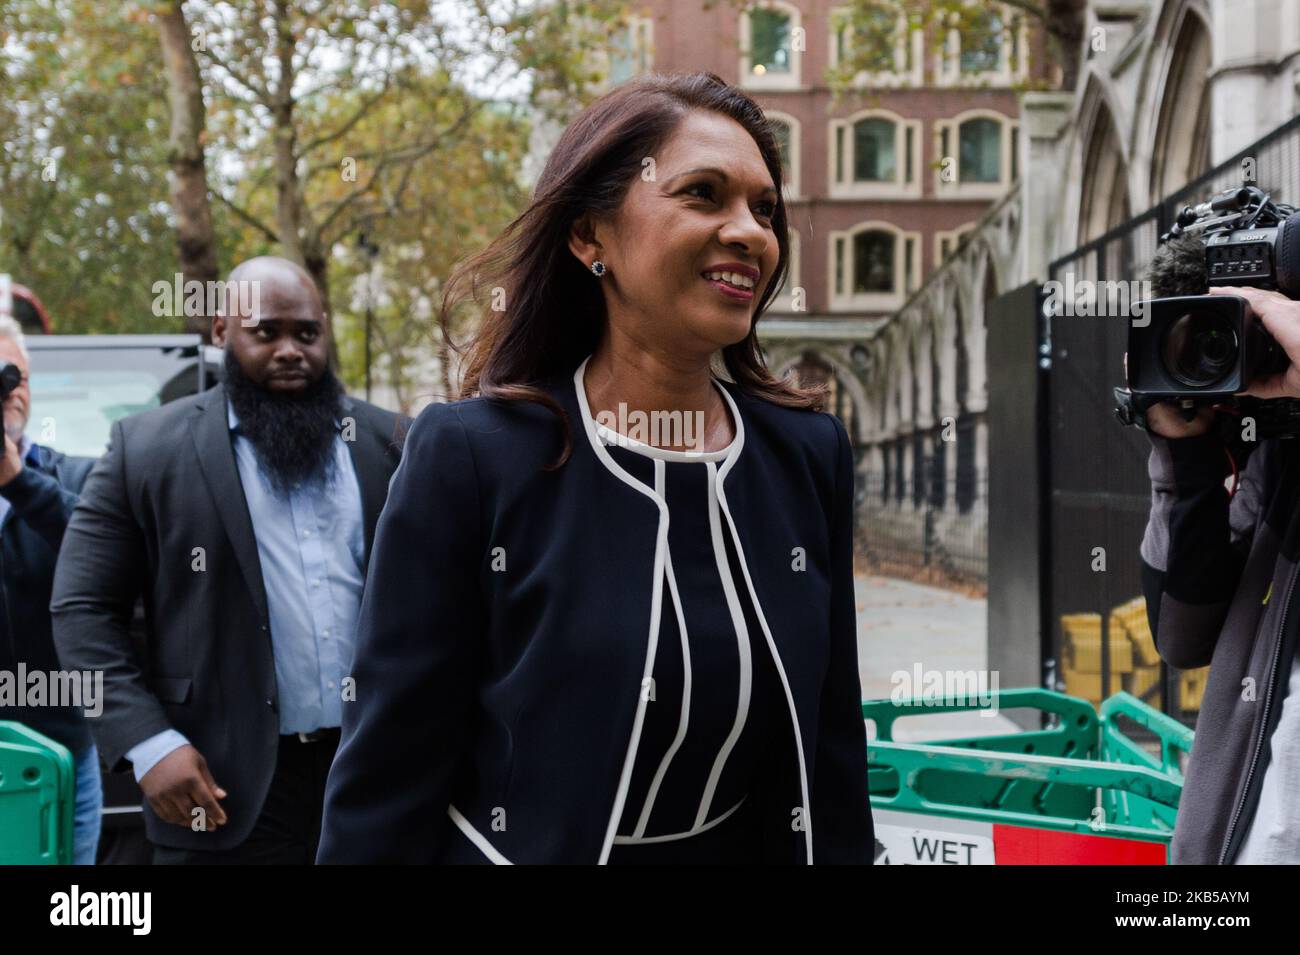 Gina Miller arrives at the Royal Courts of Justice on 06 September, 2019 in London, England. A verdict will be handed down on the legal challenge against Prime Minister Boris Johnson's planned prorogation of Parliament brought by legal campaigner Gina Miller with support of former Conservative Prime Minister John Major and Shadow Attorney General Shami Chakrabarti. (Photo by WIktor Szymanowicz/NurPhoto) Stock Photo